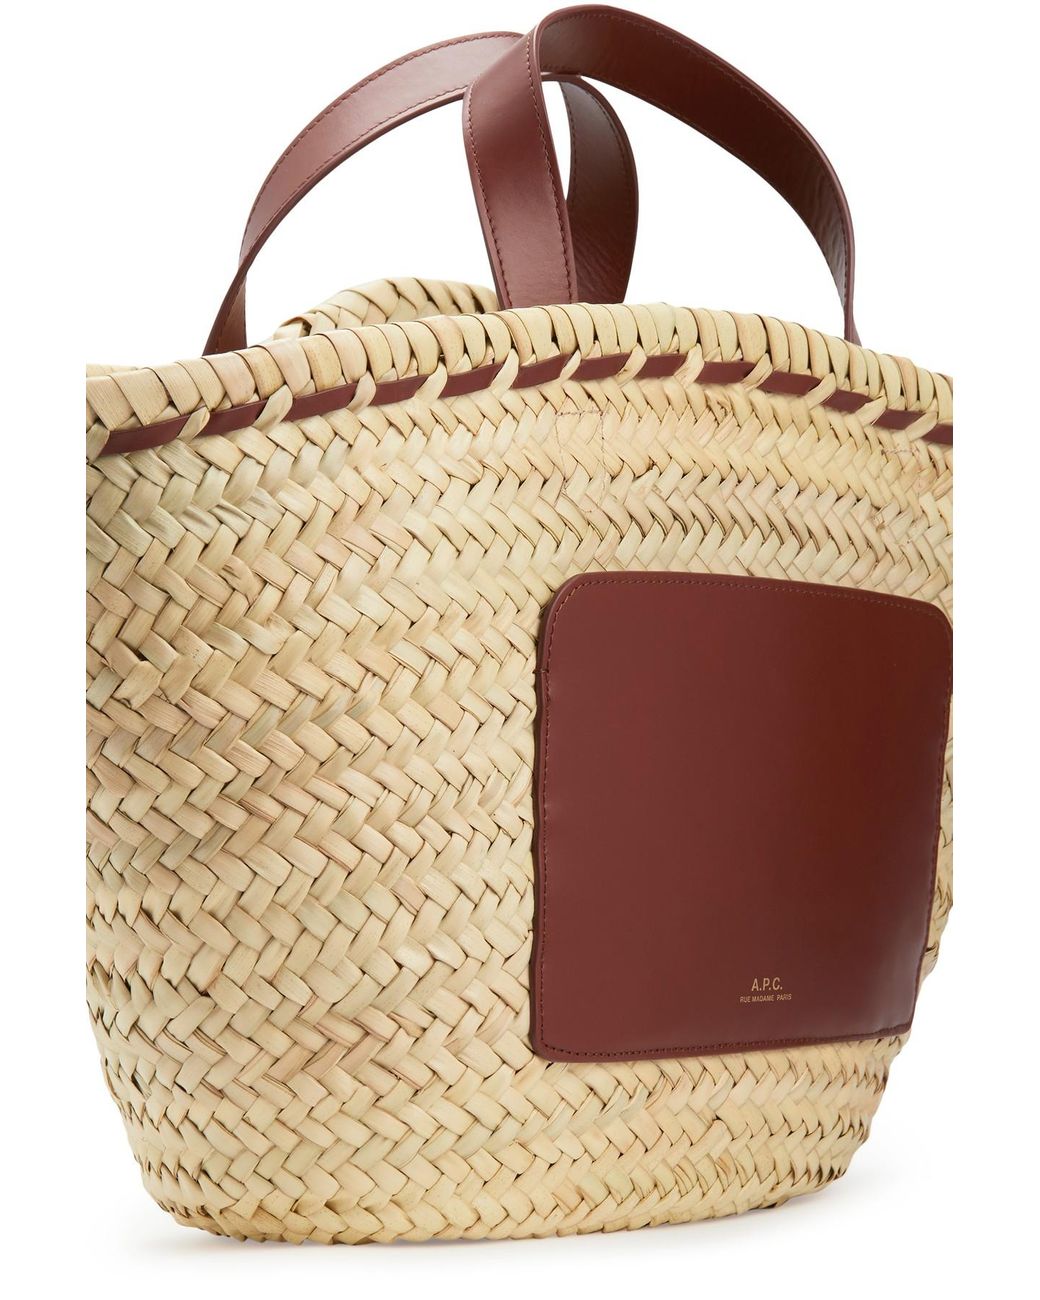 A.P.C. Leather Zoe Small Basket Bag | Lyst